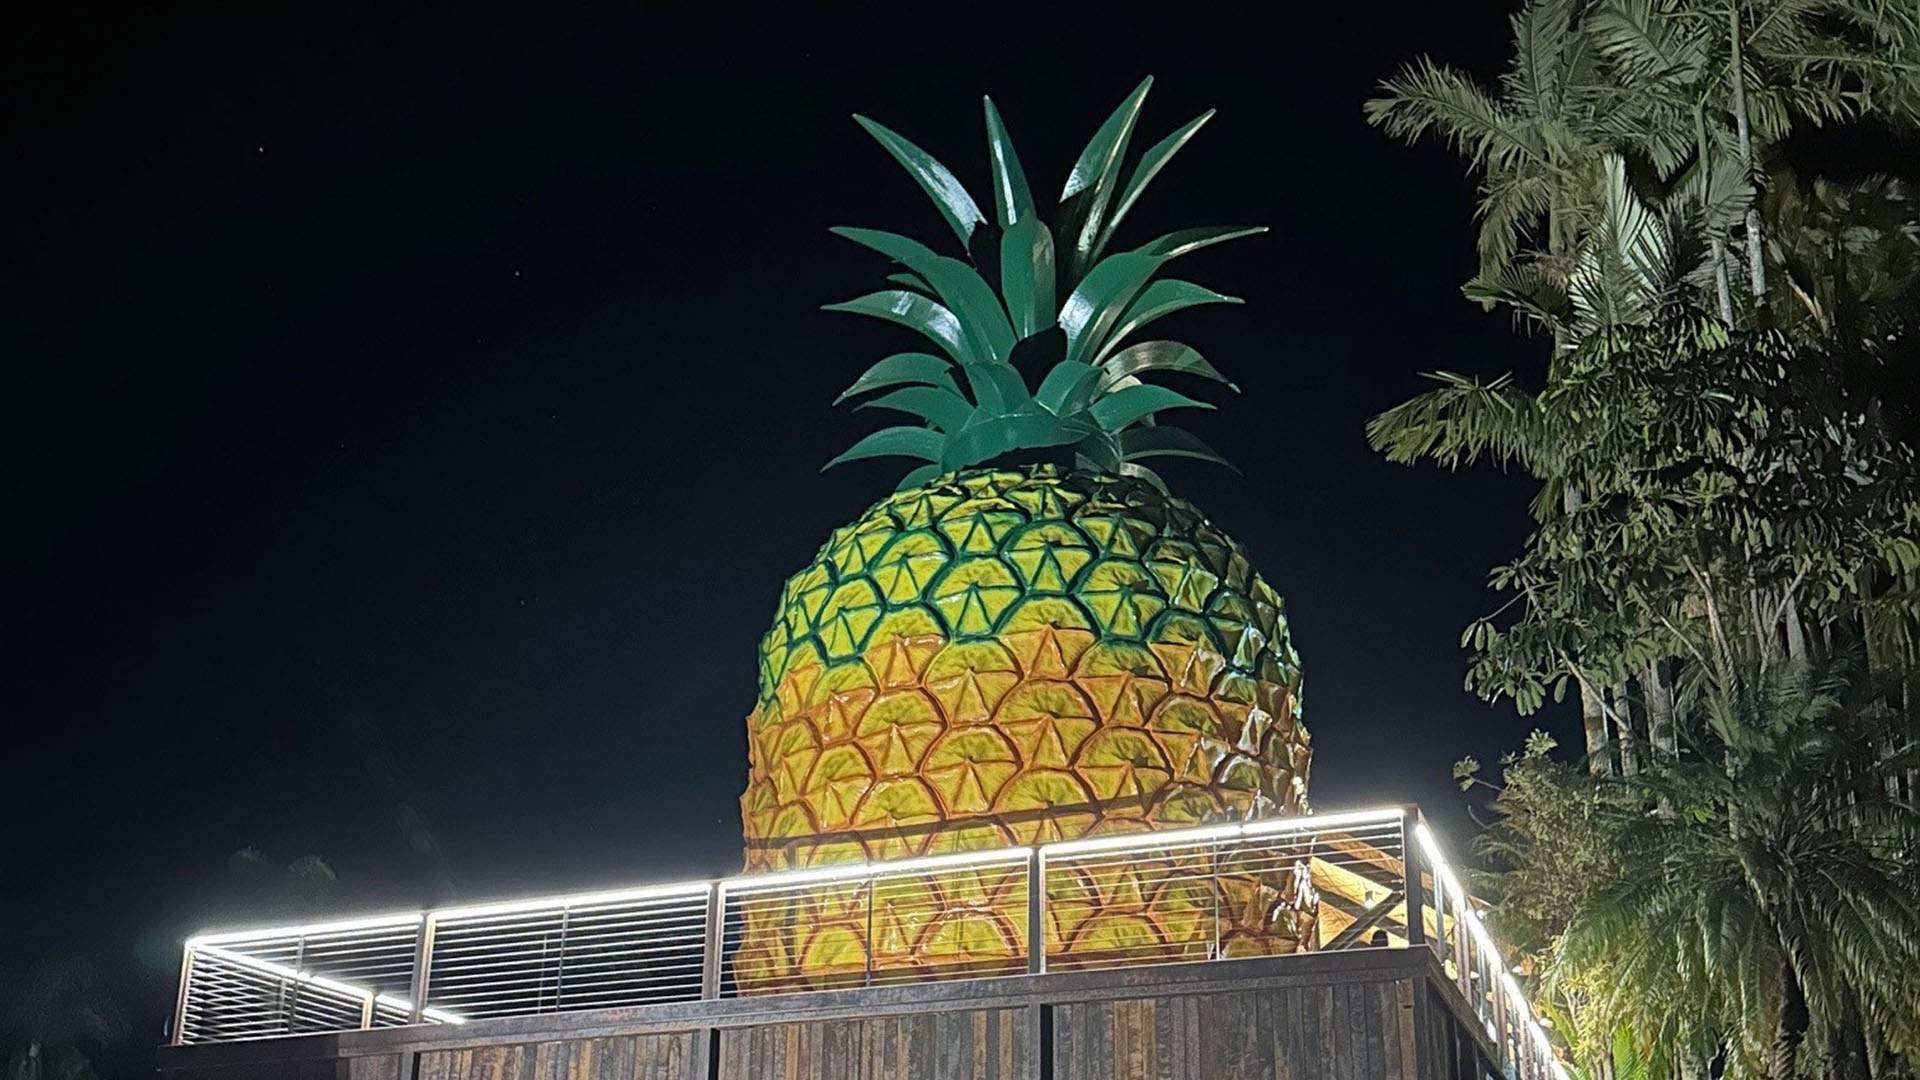 The Big Pineapple Has Reopened with a New Cafe and Viewing Platform After an Extensive Renovation